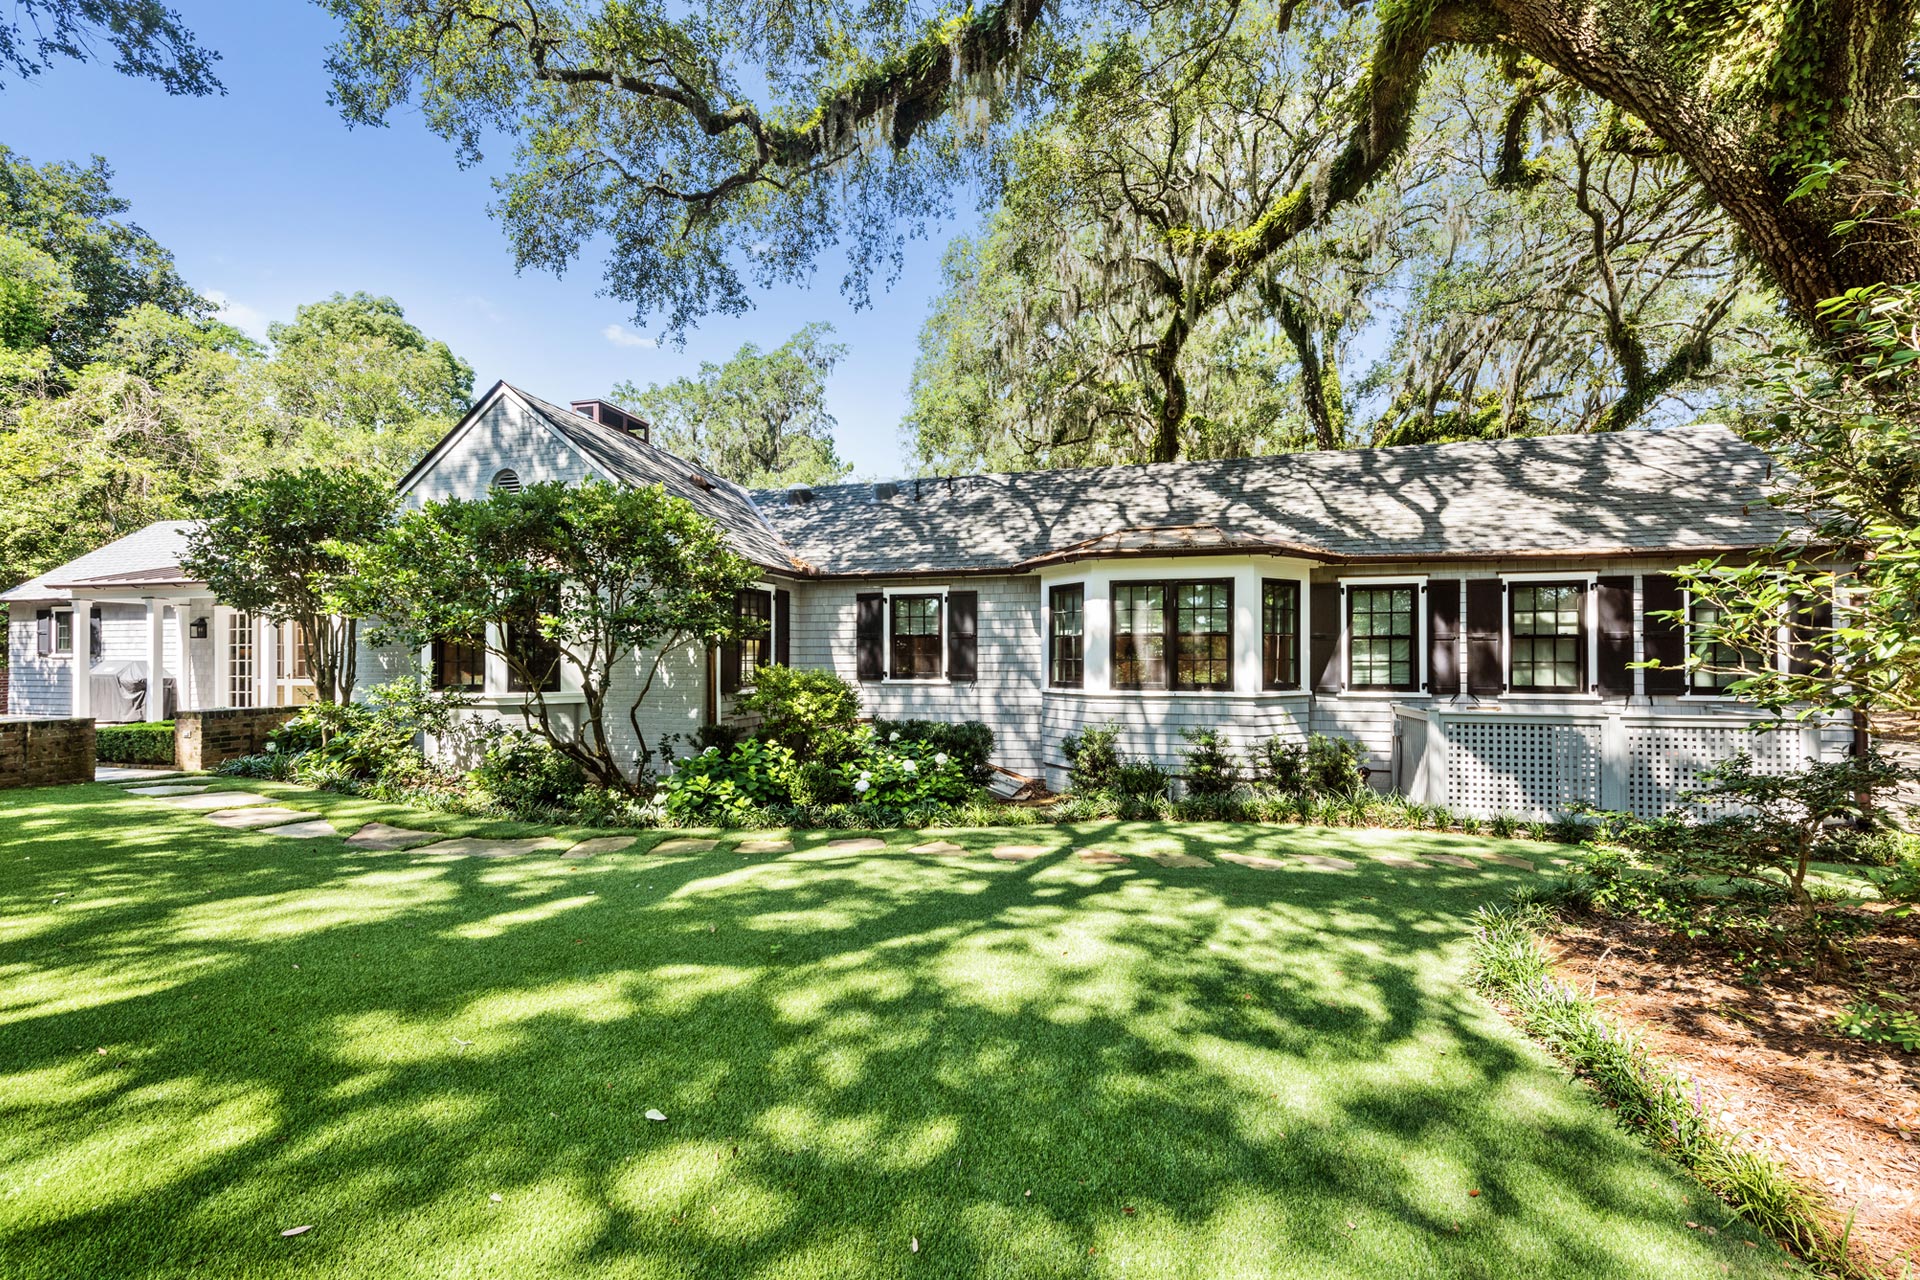 Whole house renovation and additions to charming Hanahan cottage in North Charleston